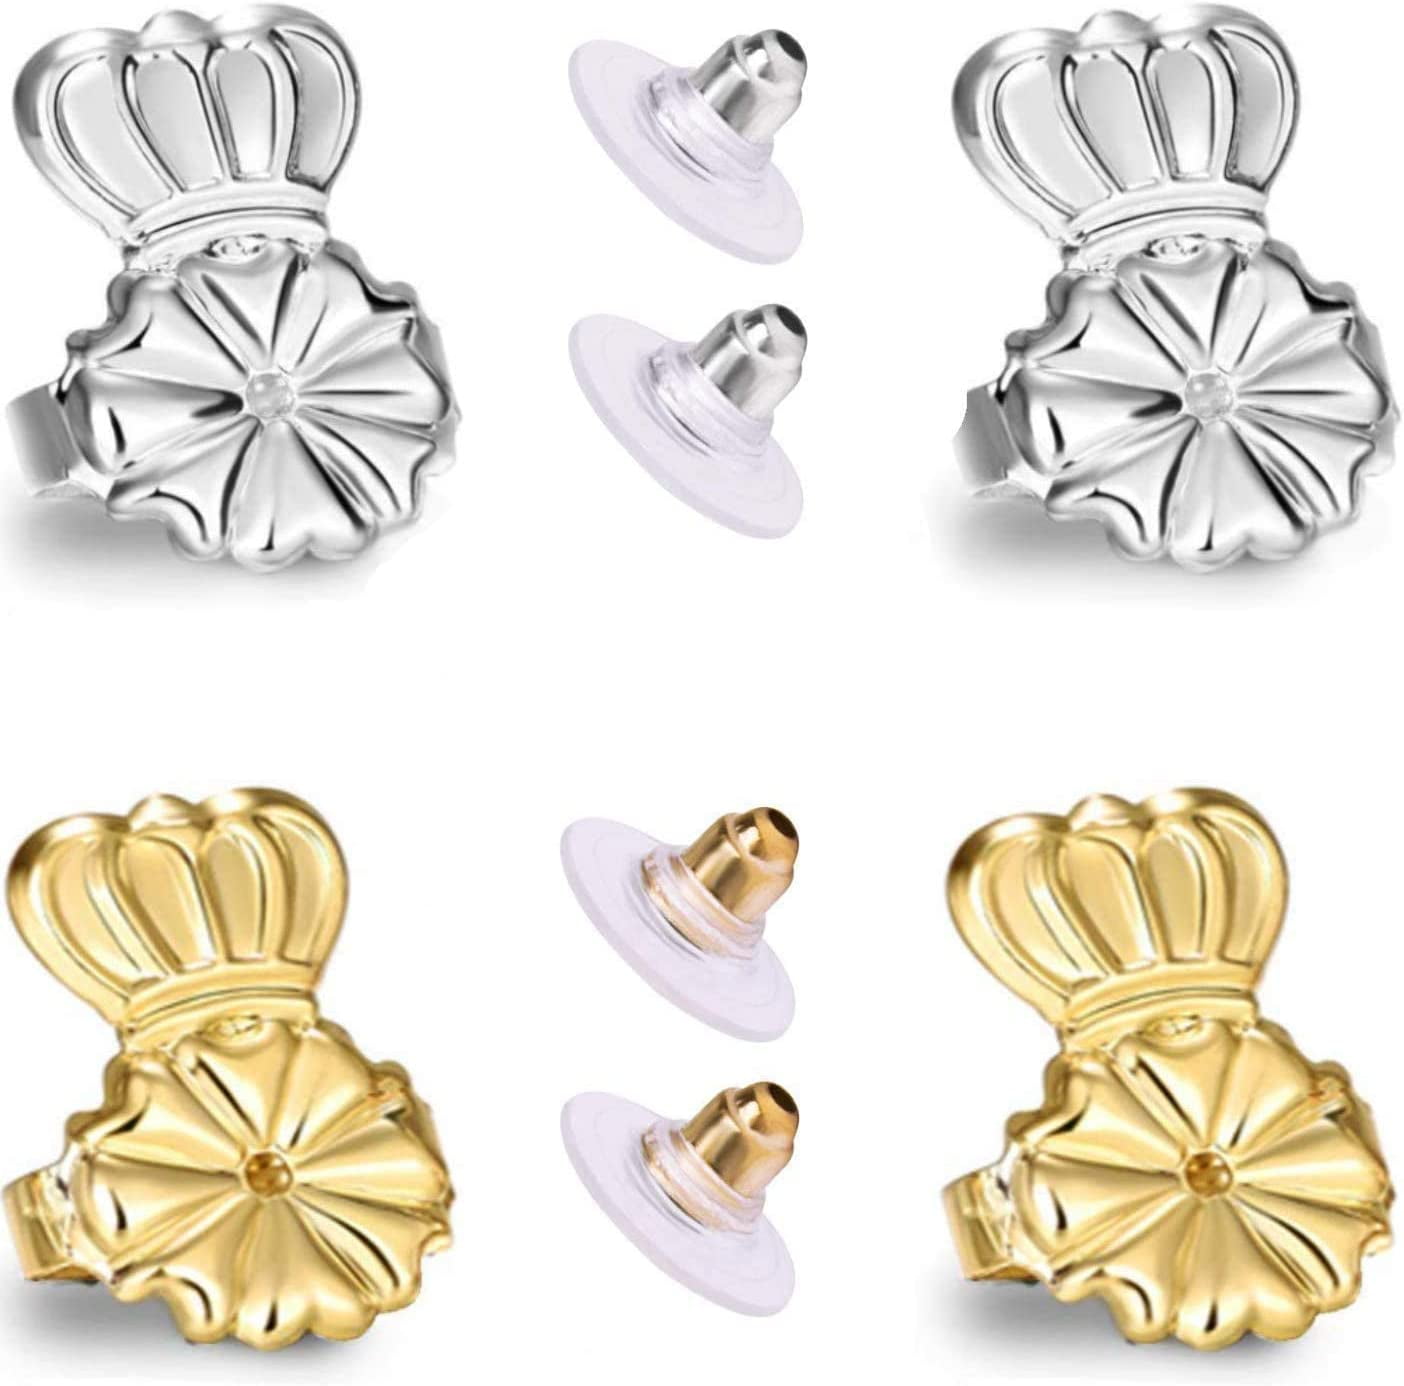 Earring Lifters Backs, 4 Pairs Secure Earring Backs for Droopy Ears, Hypoallergenic Adjustable Magic Earring Backs Tiara Earring Backs for Heavy